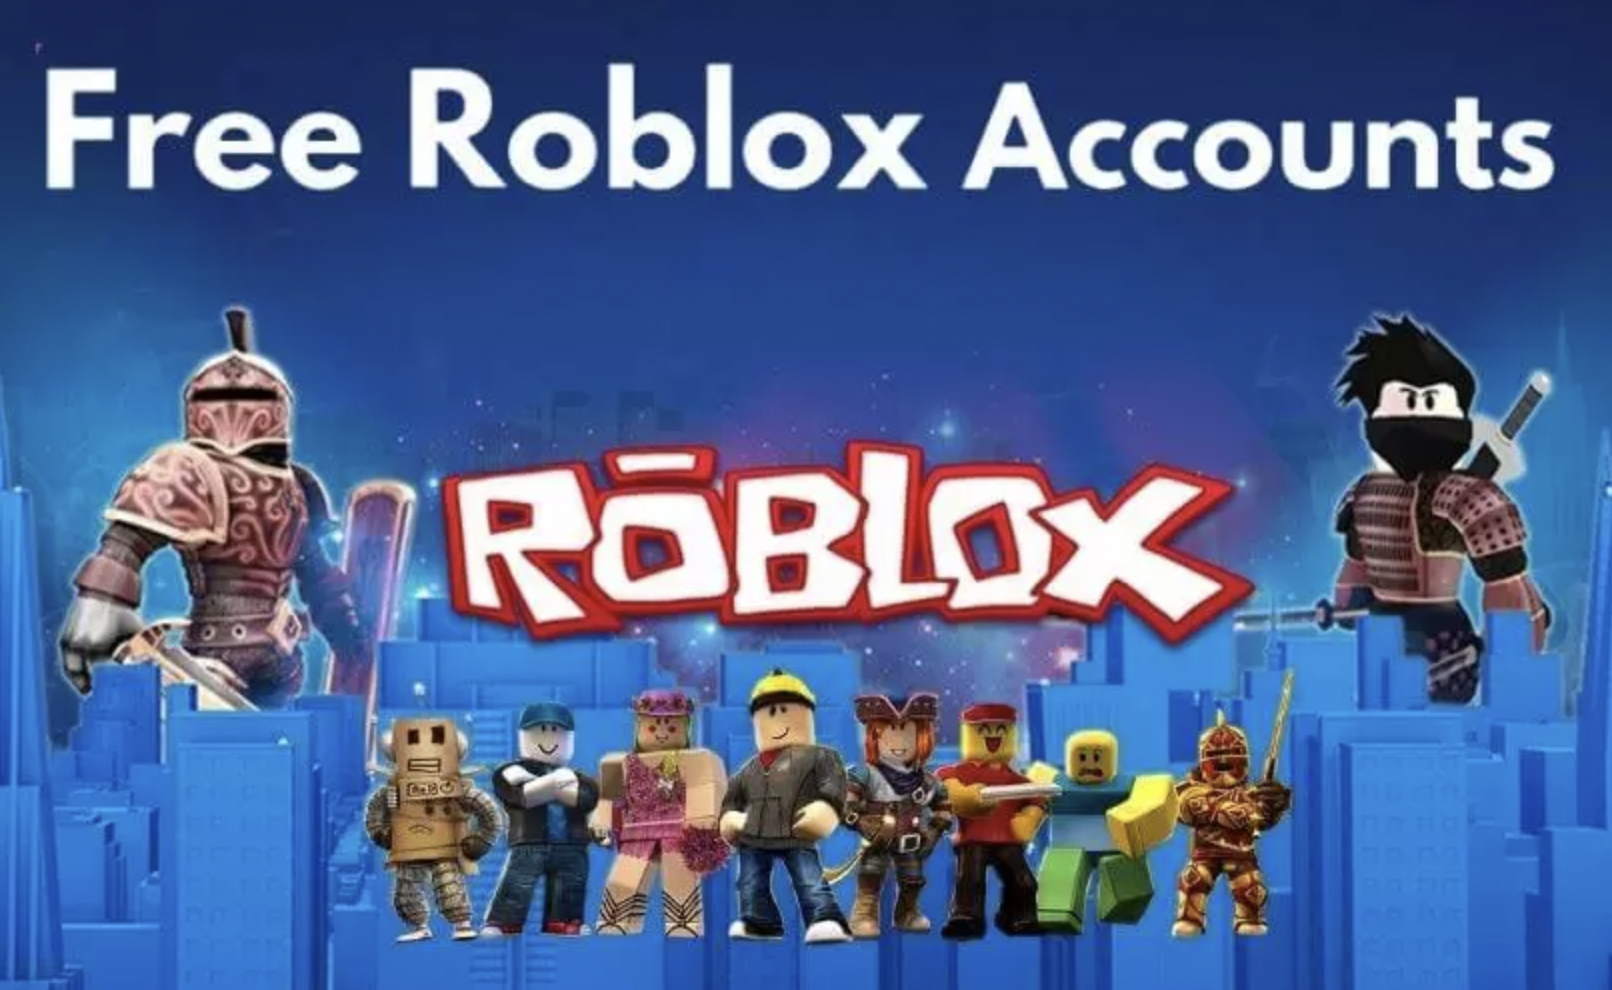 Free Roblox Accounts & Passwords with Robux | 100% Working 